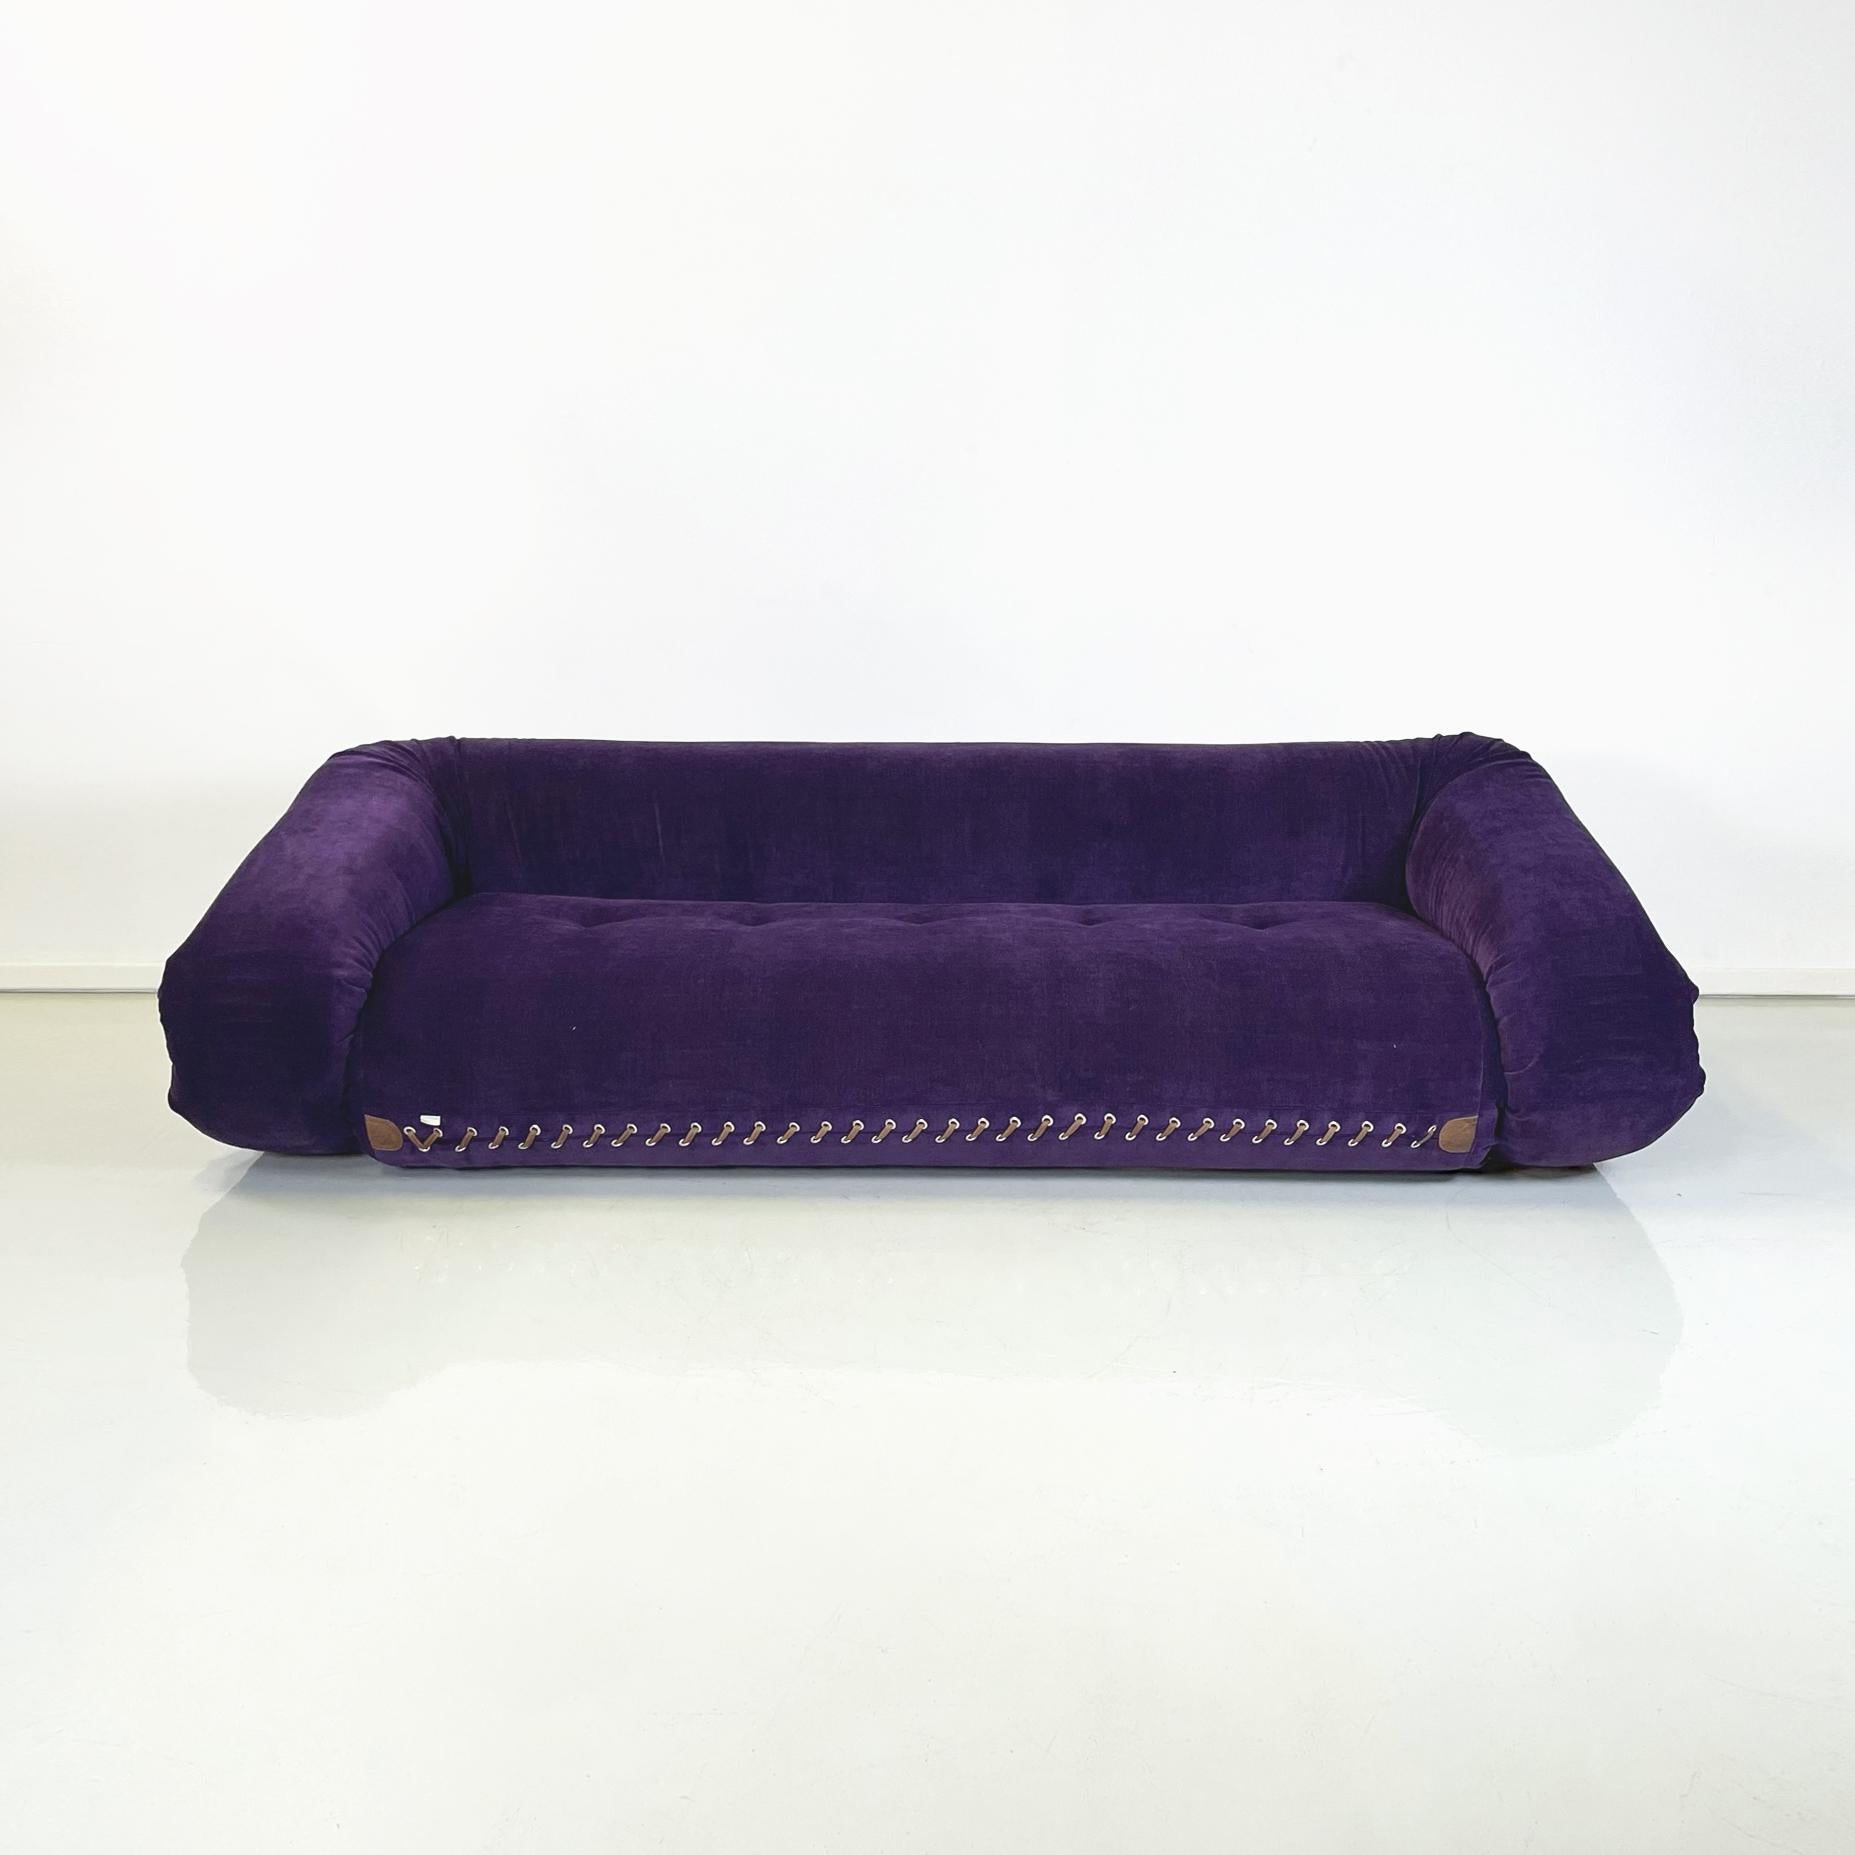 Italian Modern Purple Velvet Sofa Bed Anfibio by Becchi for Giovannetti, 1970s In Good Condition For Sale In MIlano, IT